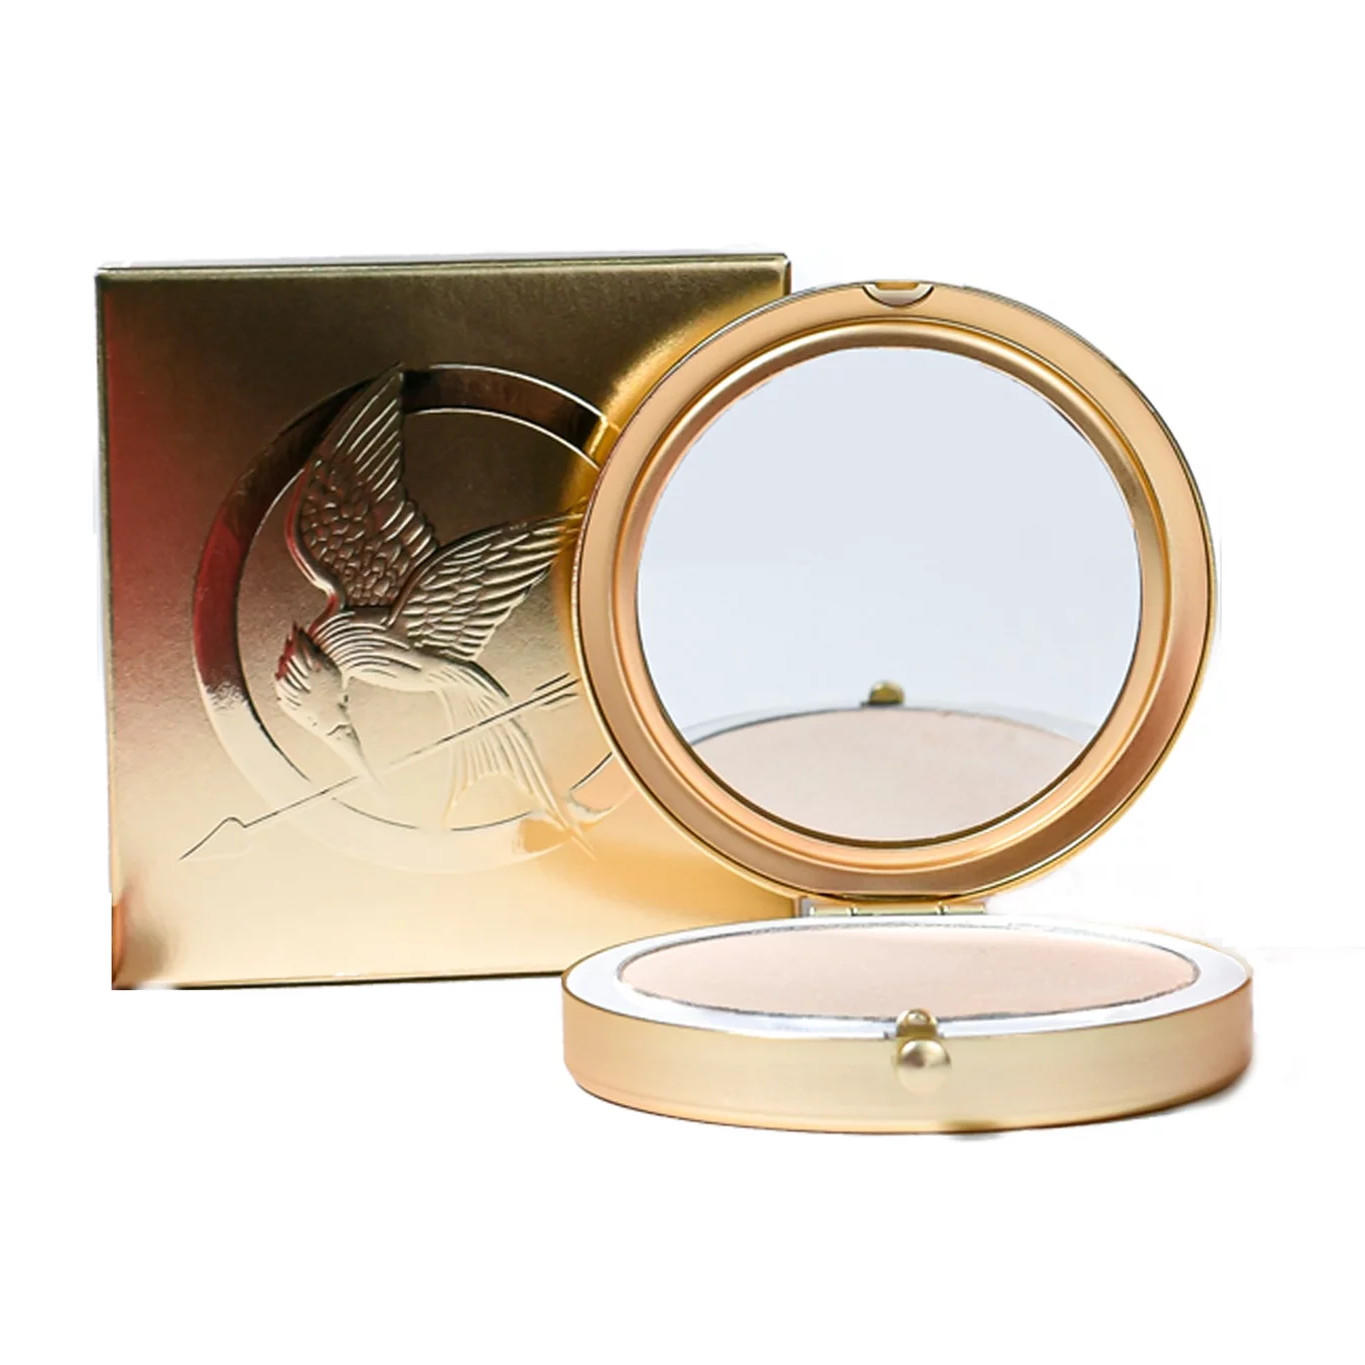 Storybook Cosmetics x The Hunger Games Highlighter Girl On Fire